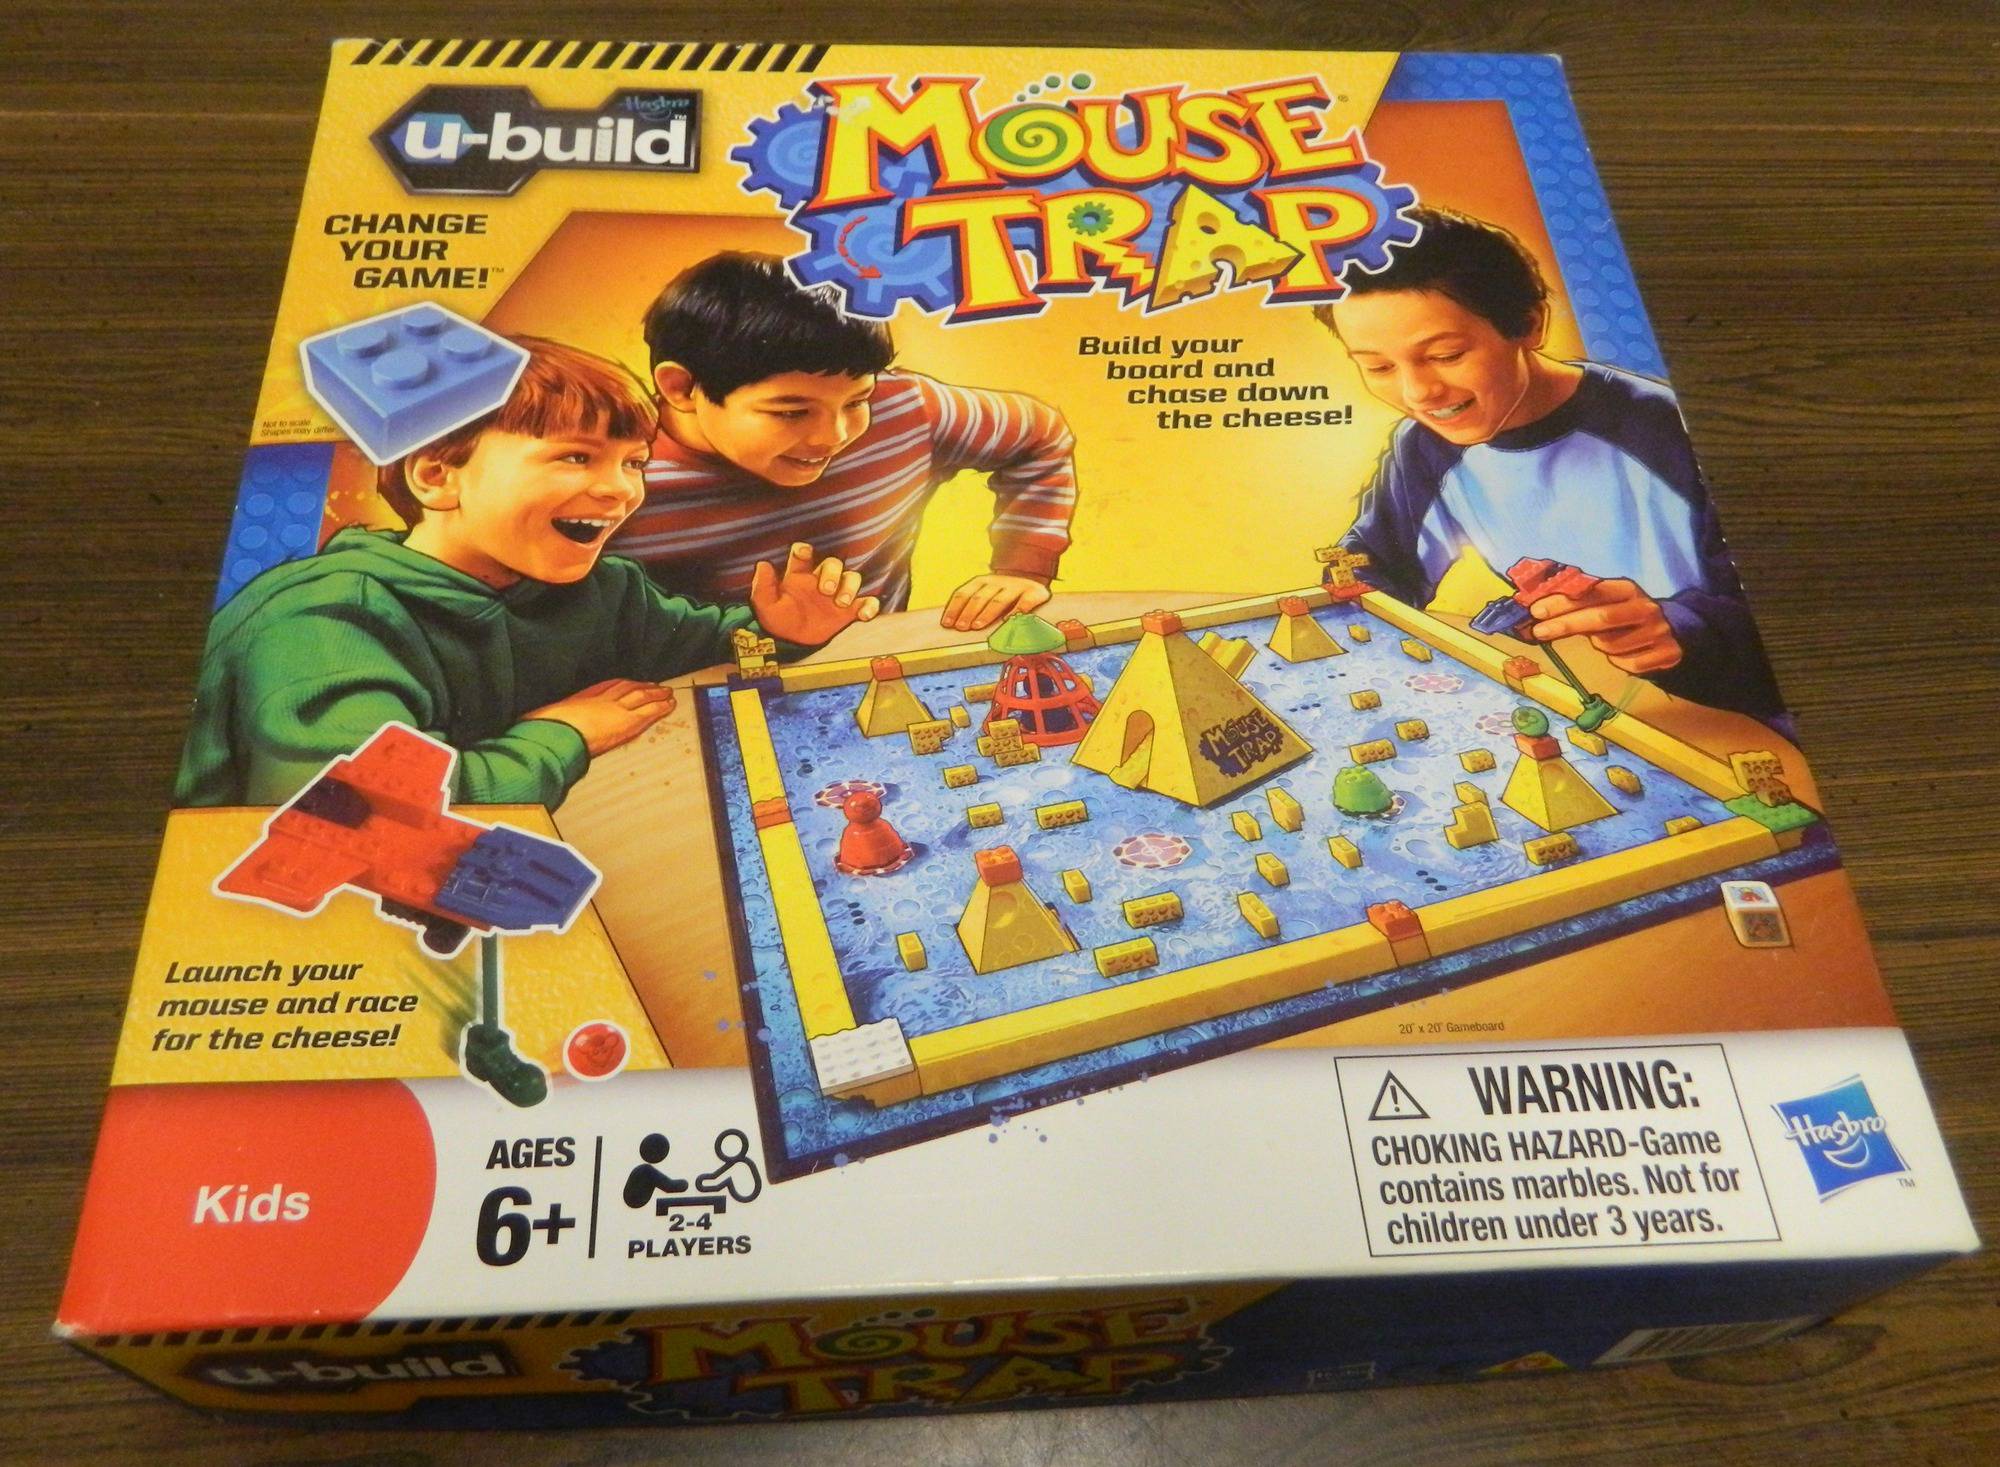 Catching Real Mice with the Mouse Trap Board Game